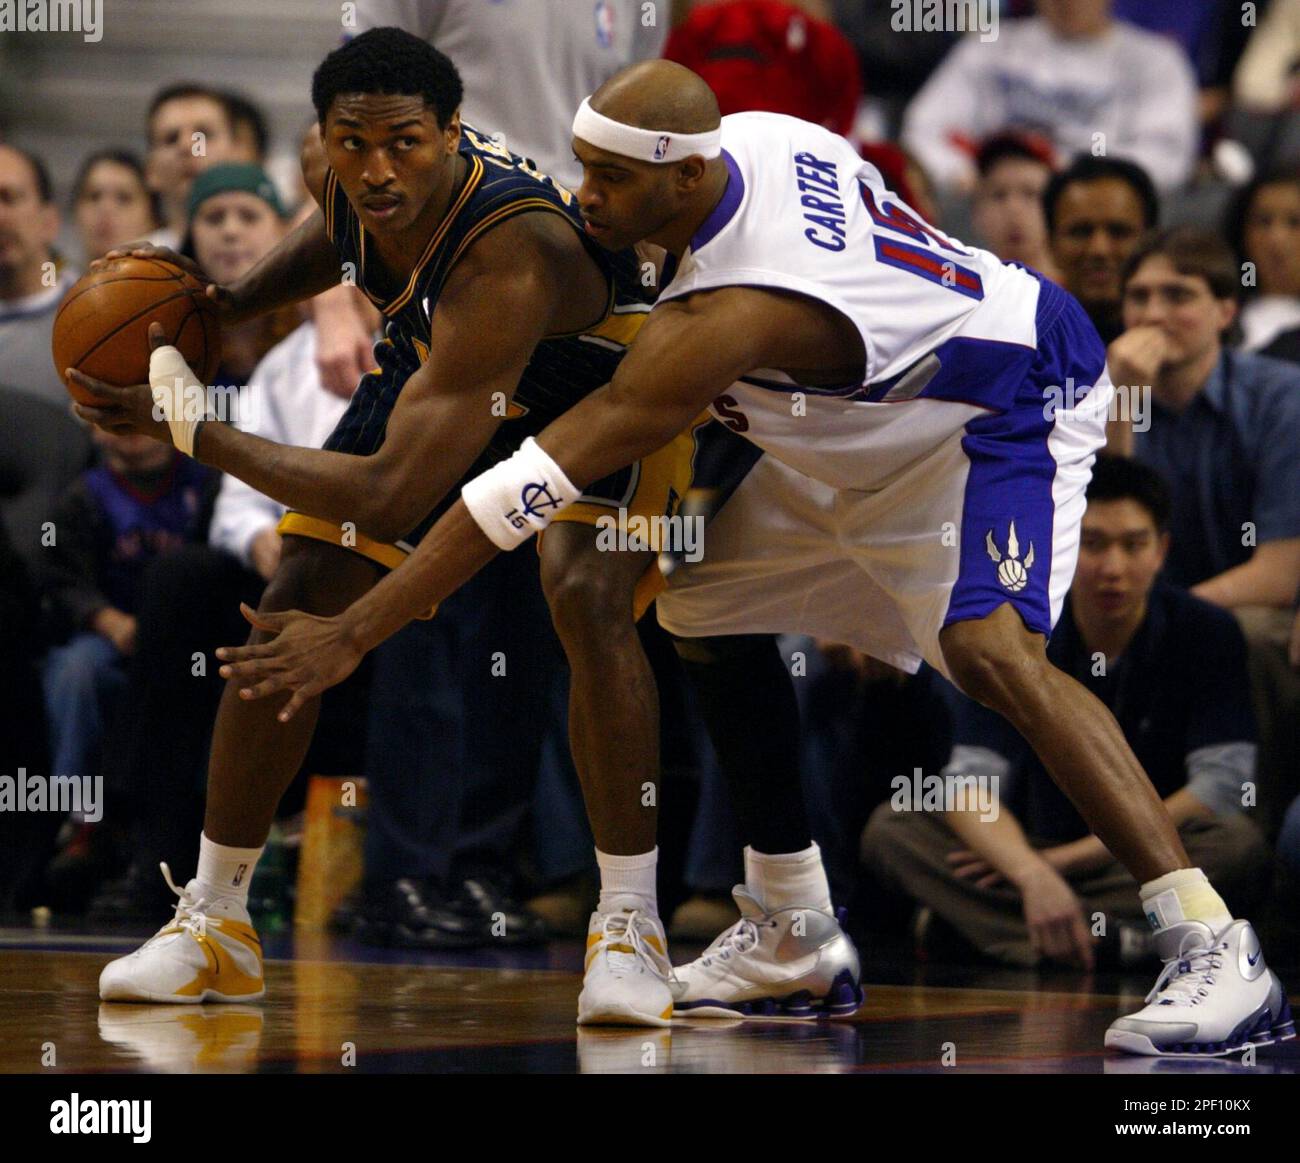 Toronto Raptors' Vince Carter tries to slow down Indiana Pacers Ron Artest during NBA action in Toronto, Wednesday April 7, 2004. (AP PHOTO/Adrian Wyld) Stock Photo